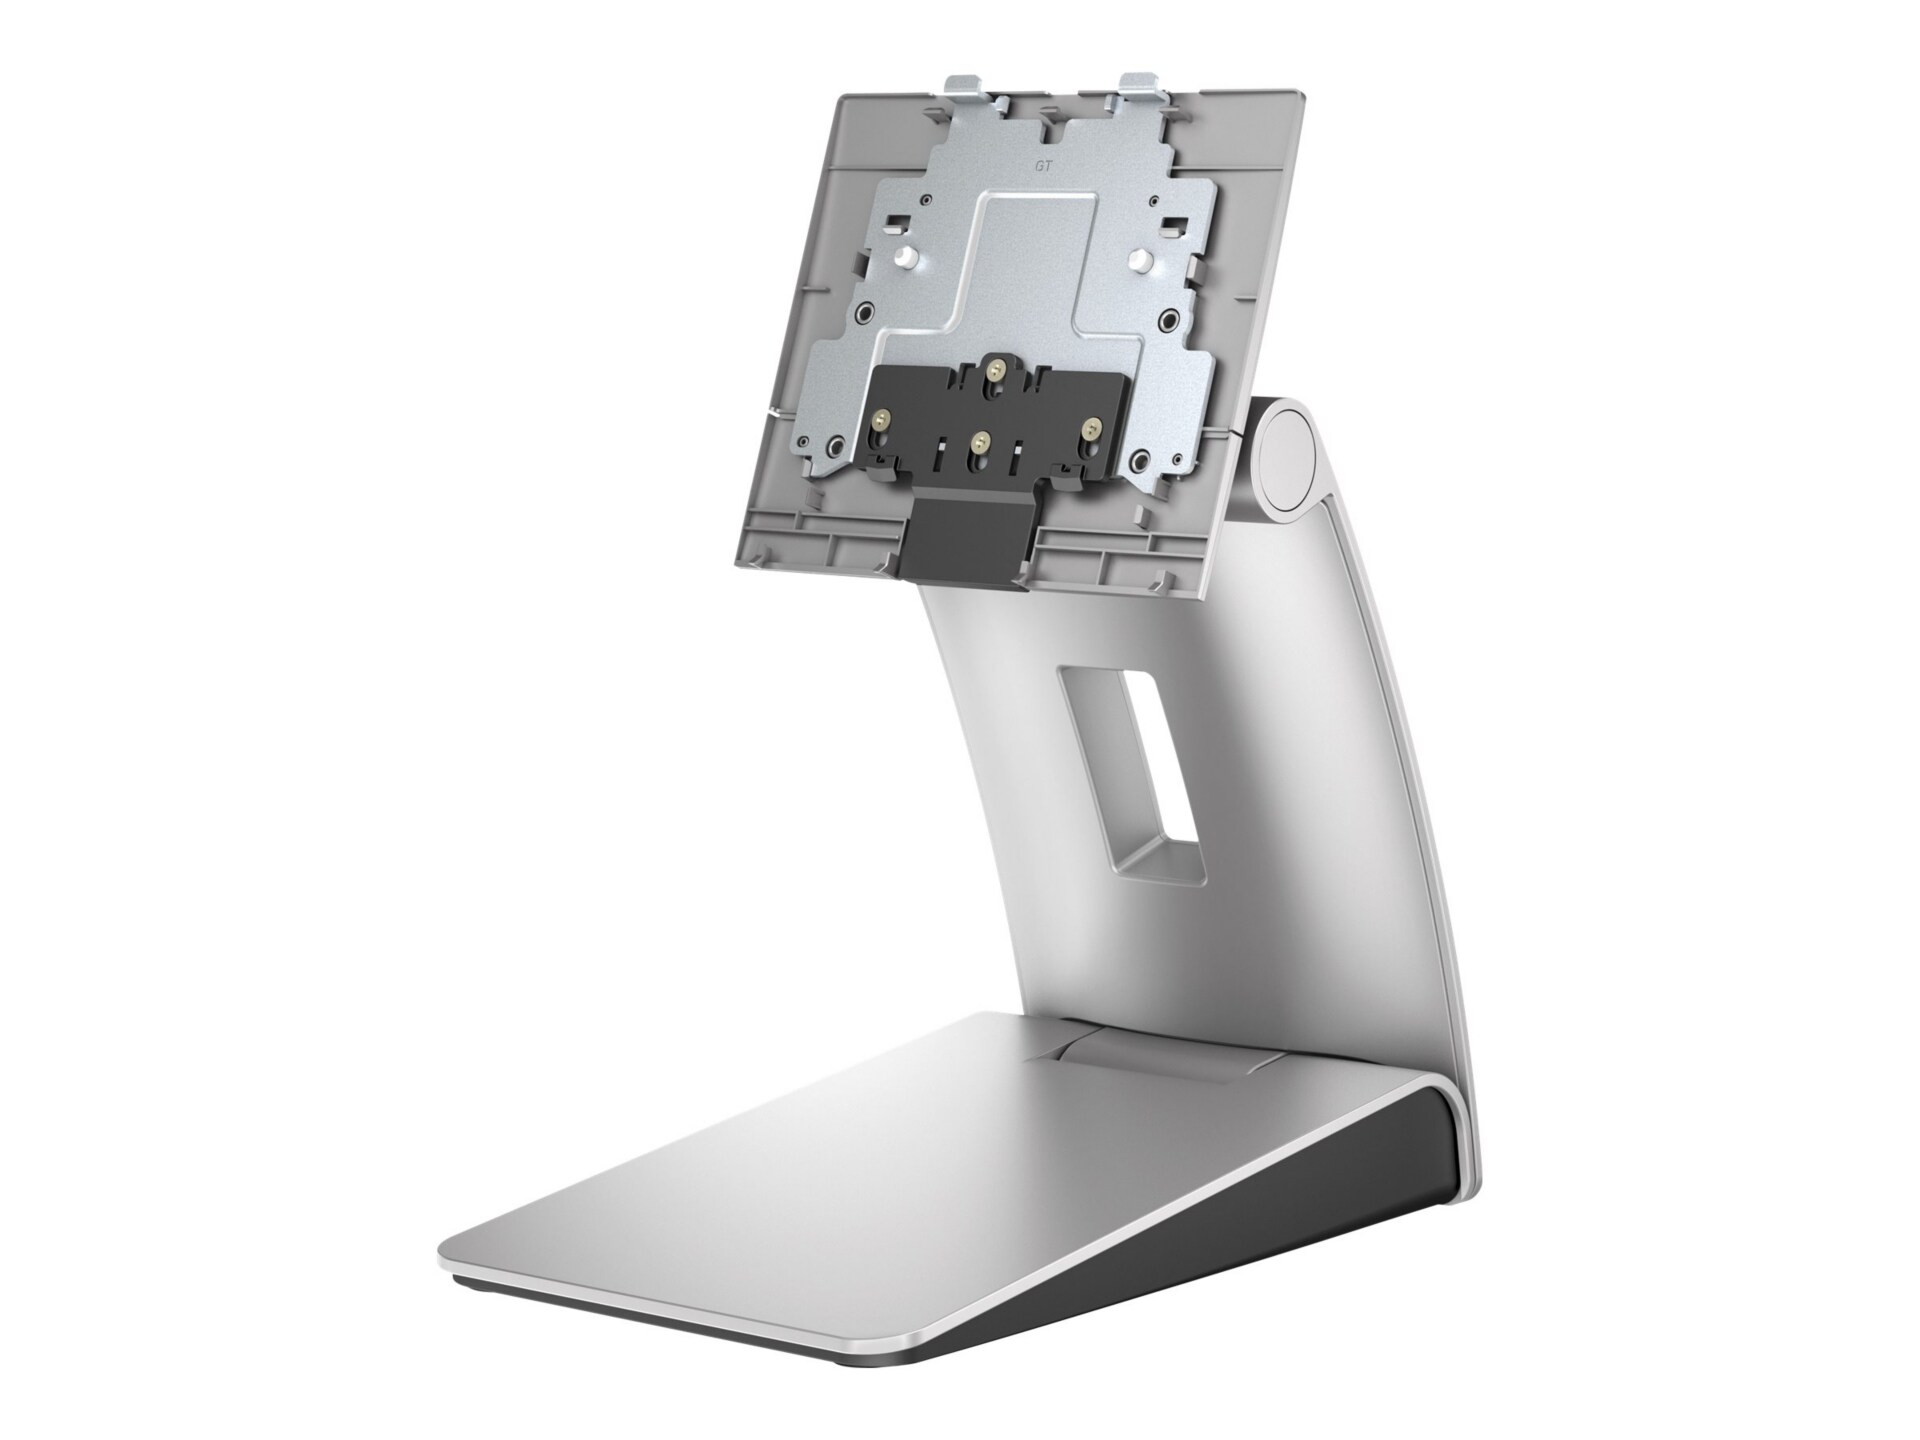 HP Recline Stand - stand kit